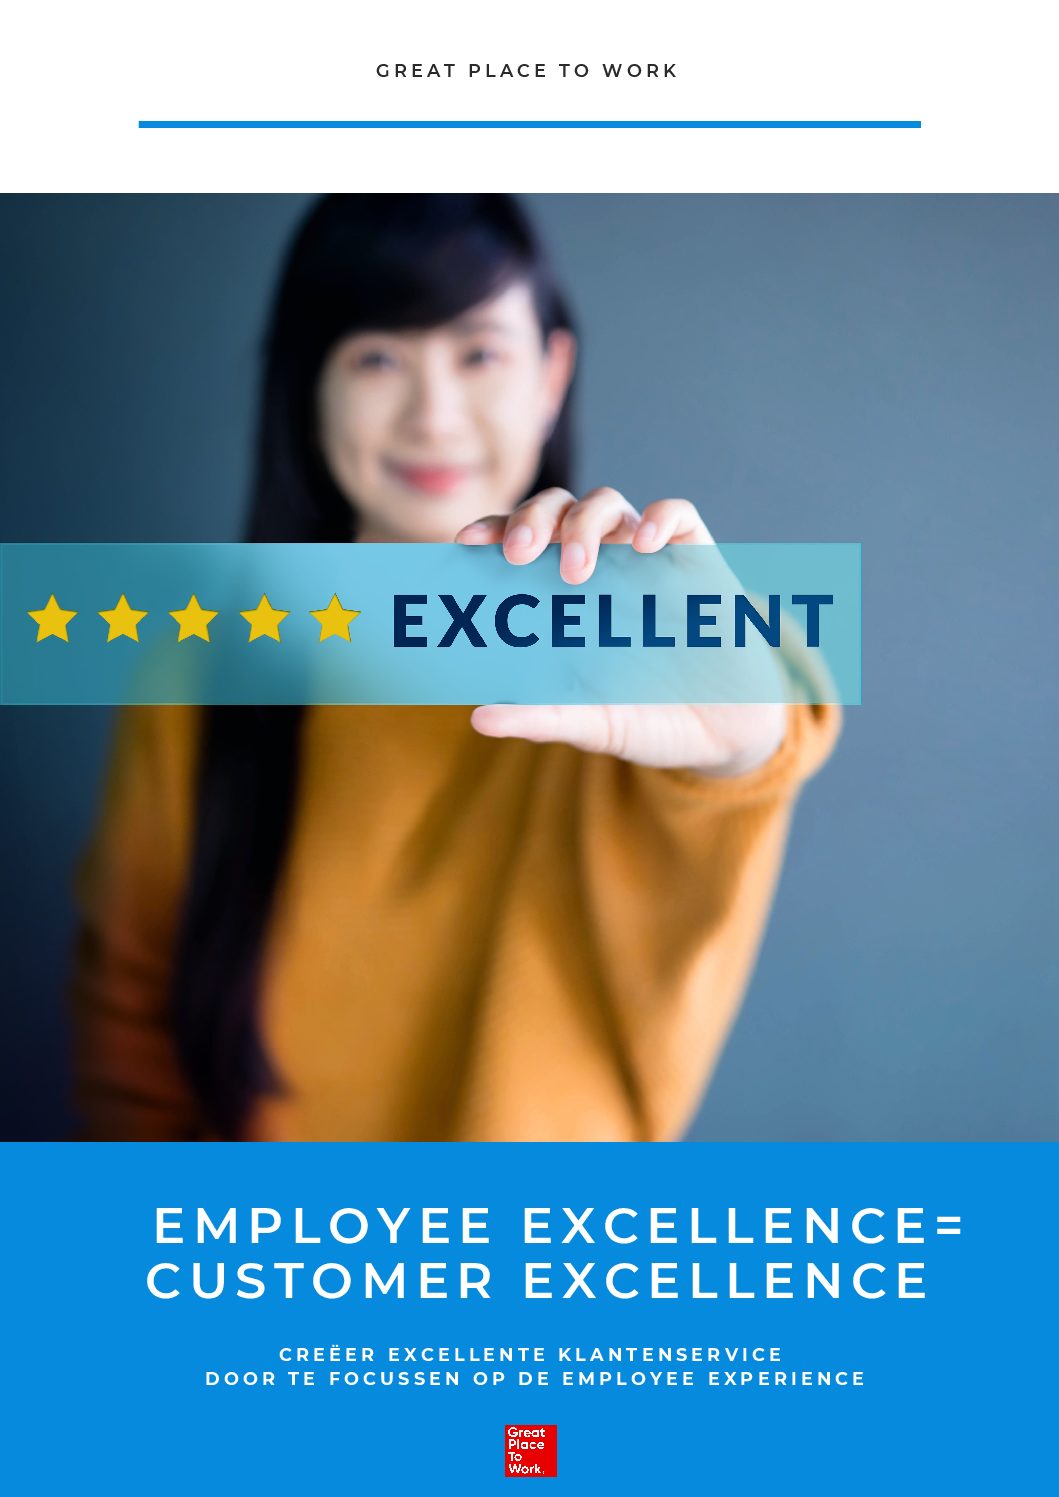 Employee Excellence = Customer Excellence